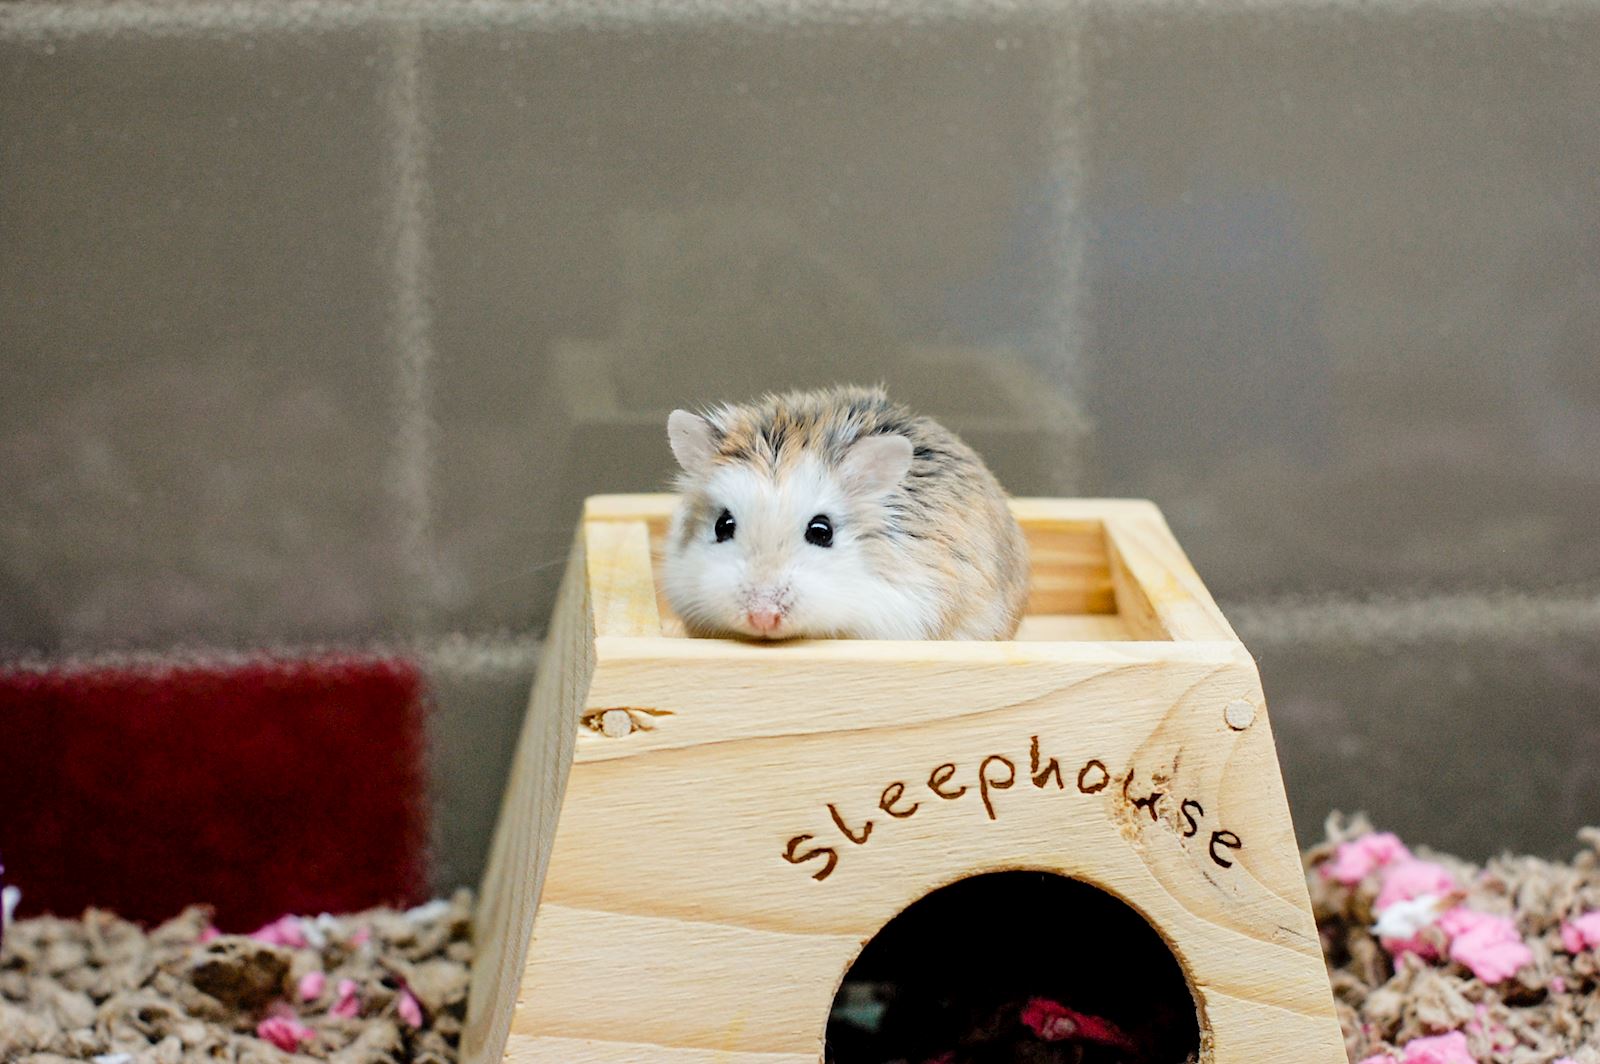 Shelter Dogs of Portland: BABY HAMSTERS - nice easy little pets